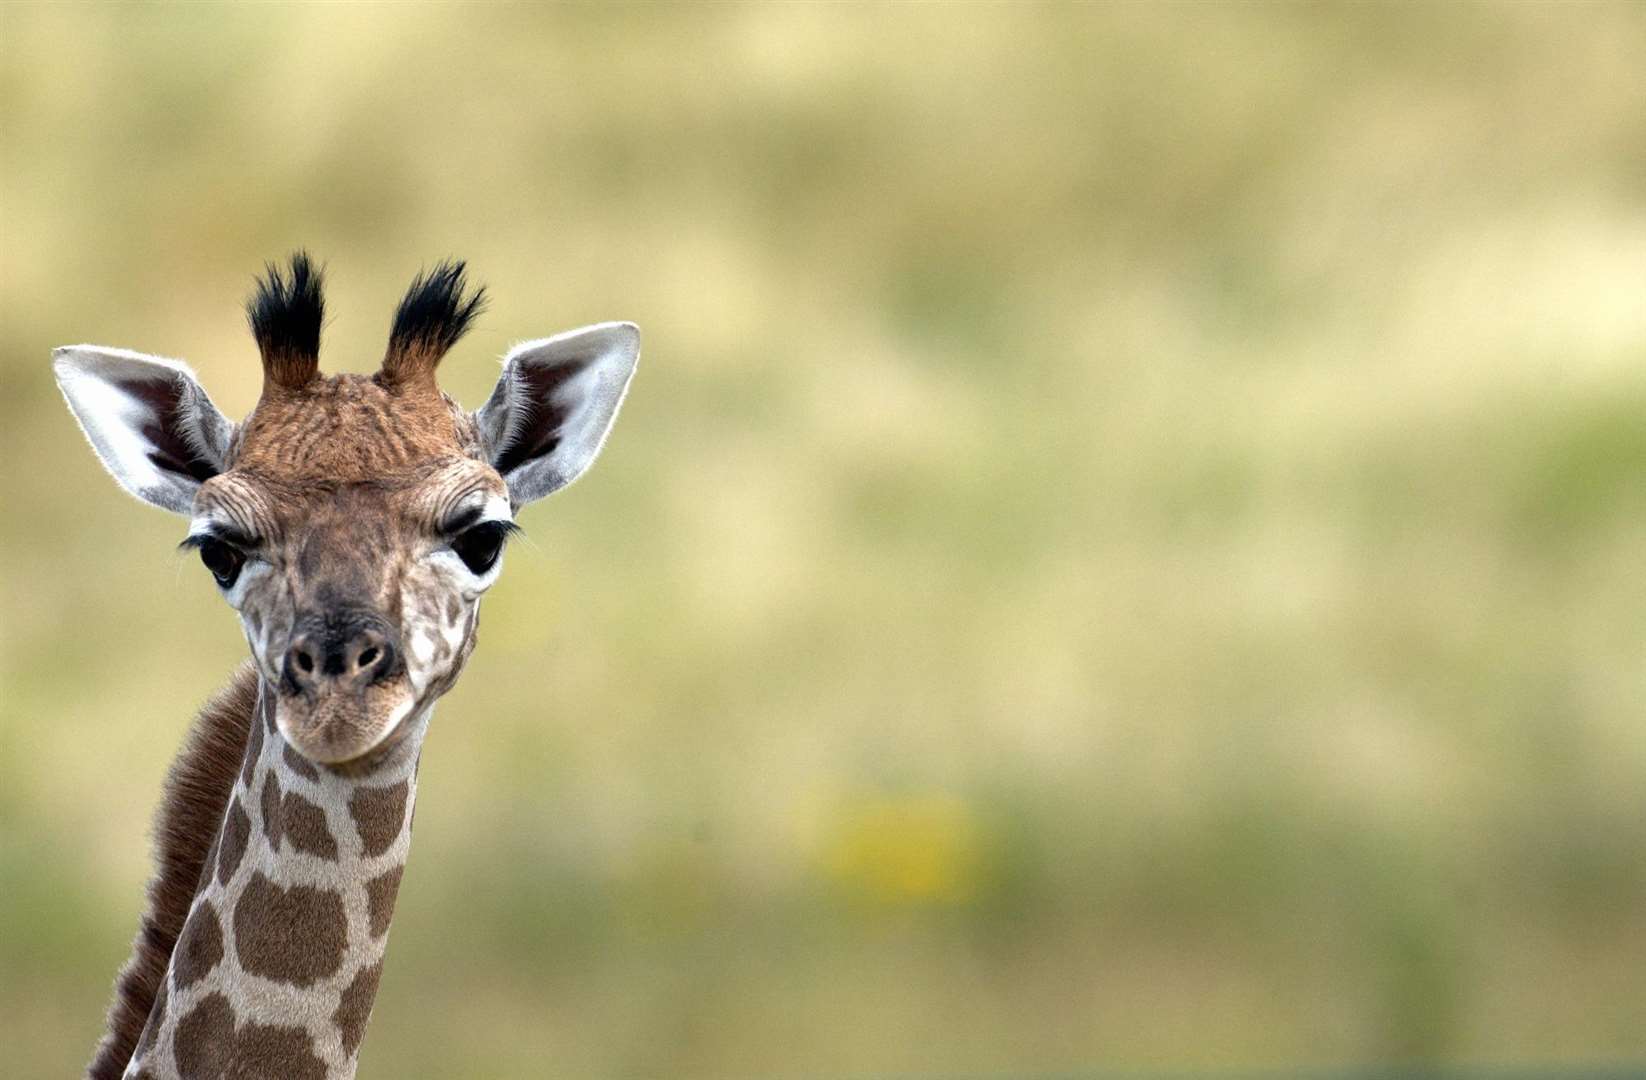 You can see giraffes at Port Lympne